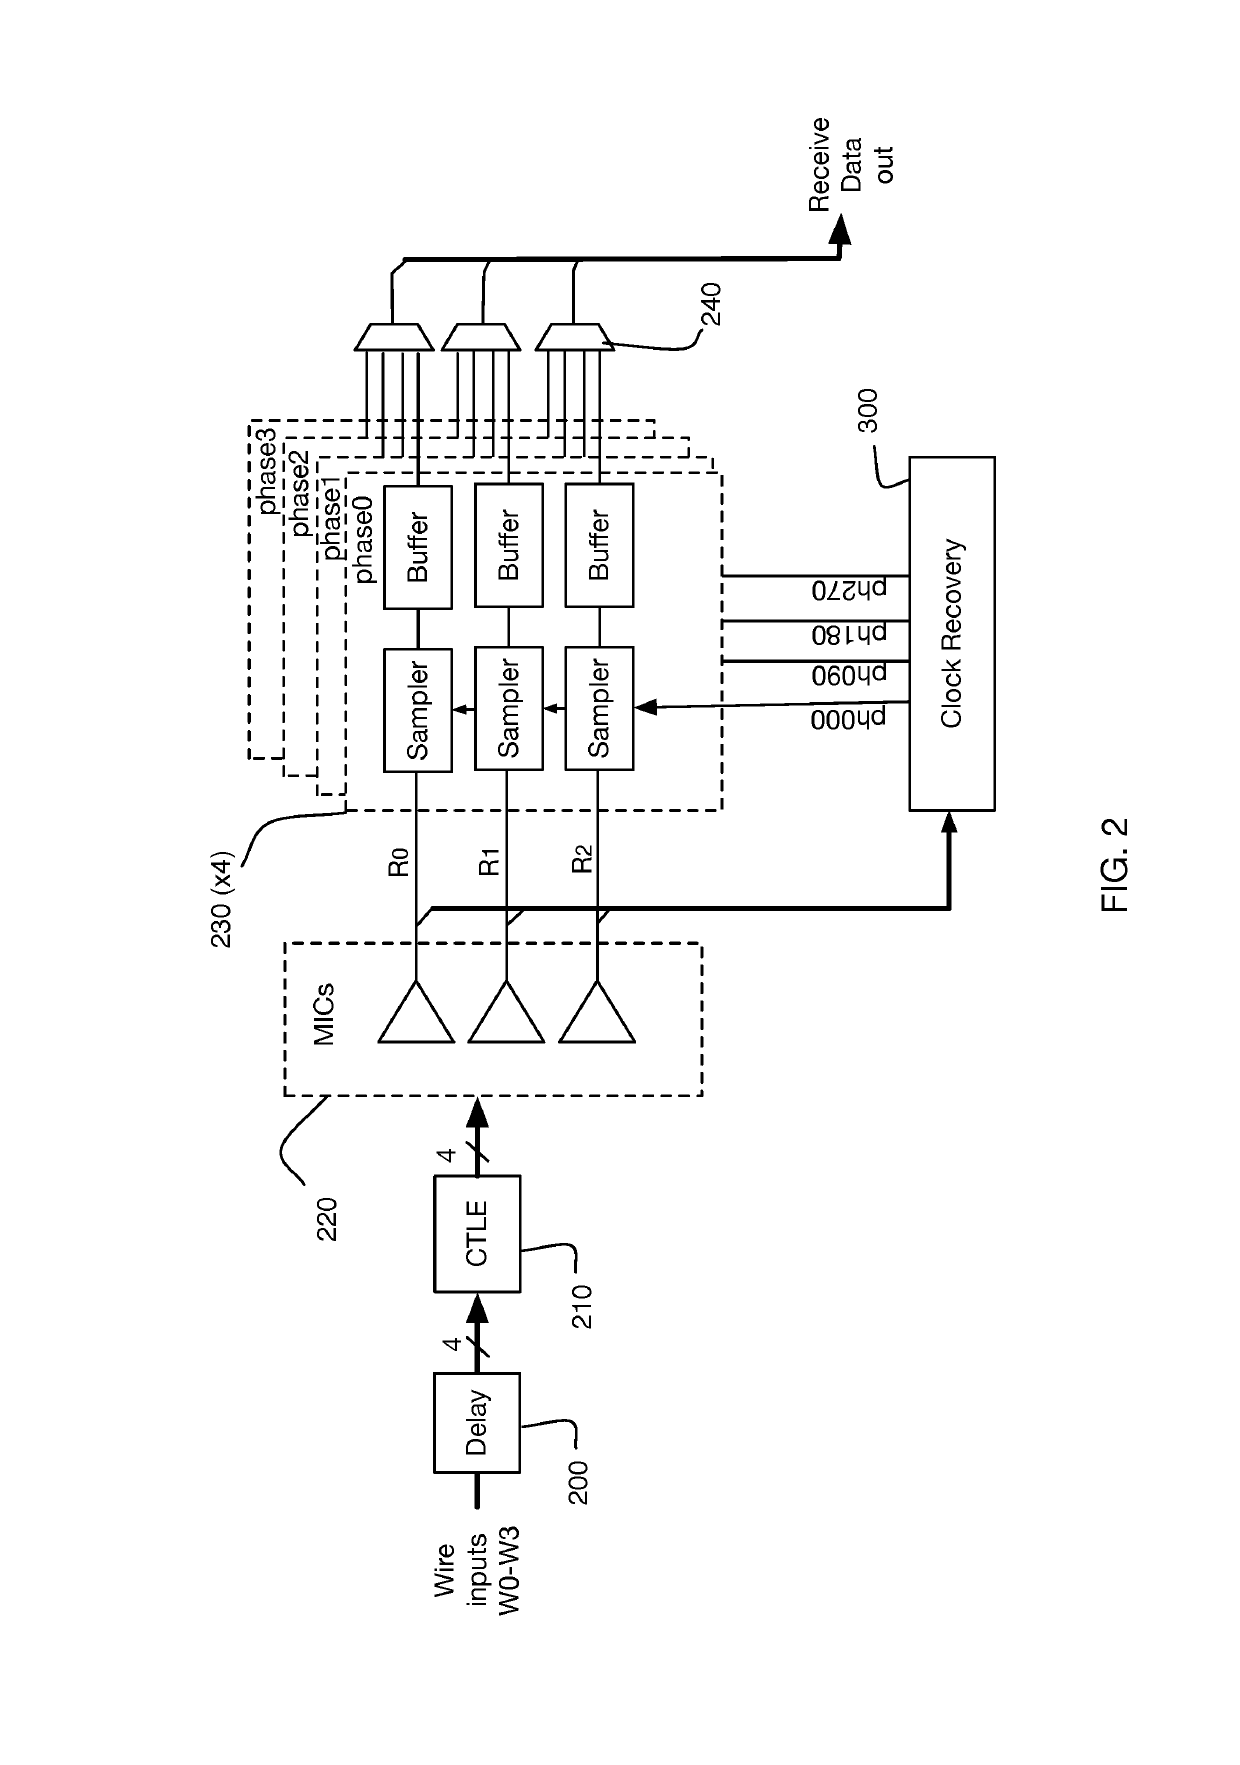 Method and system for calibrating multi-wire skew